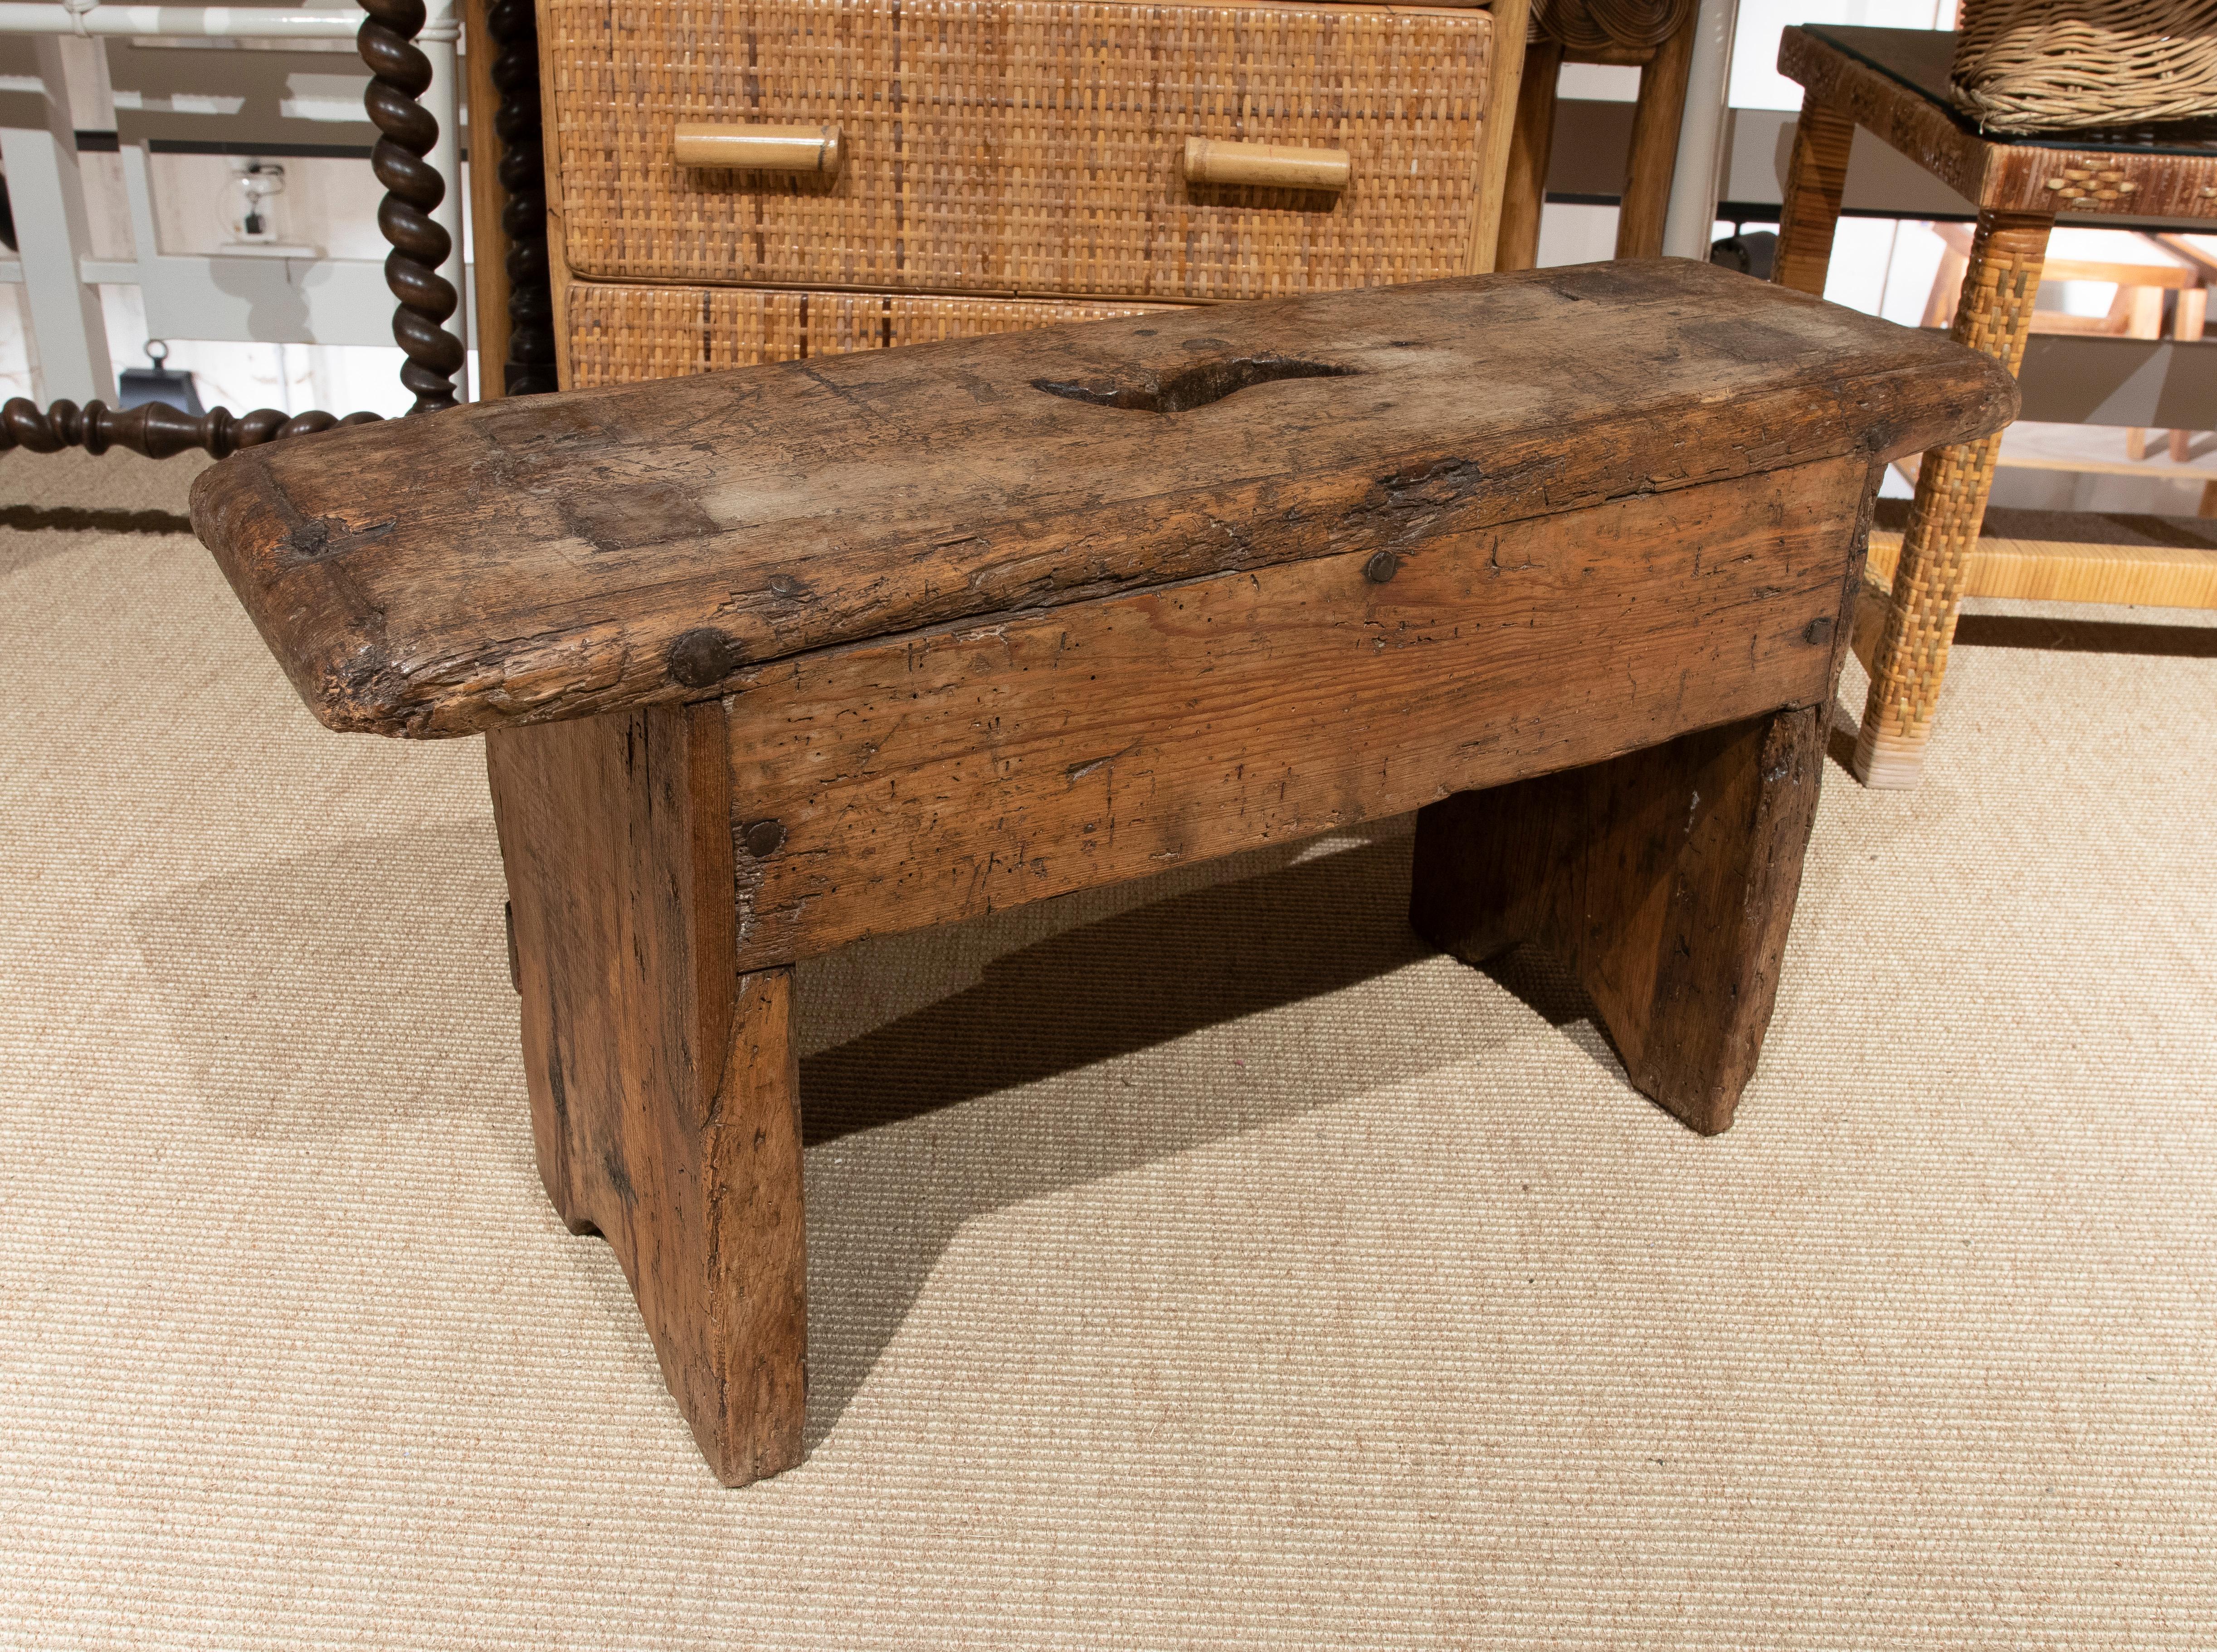 18th Century and Earlier 18th Century Wooden Bench with Seat Decorated